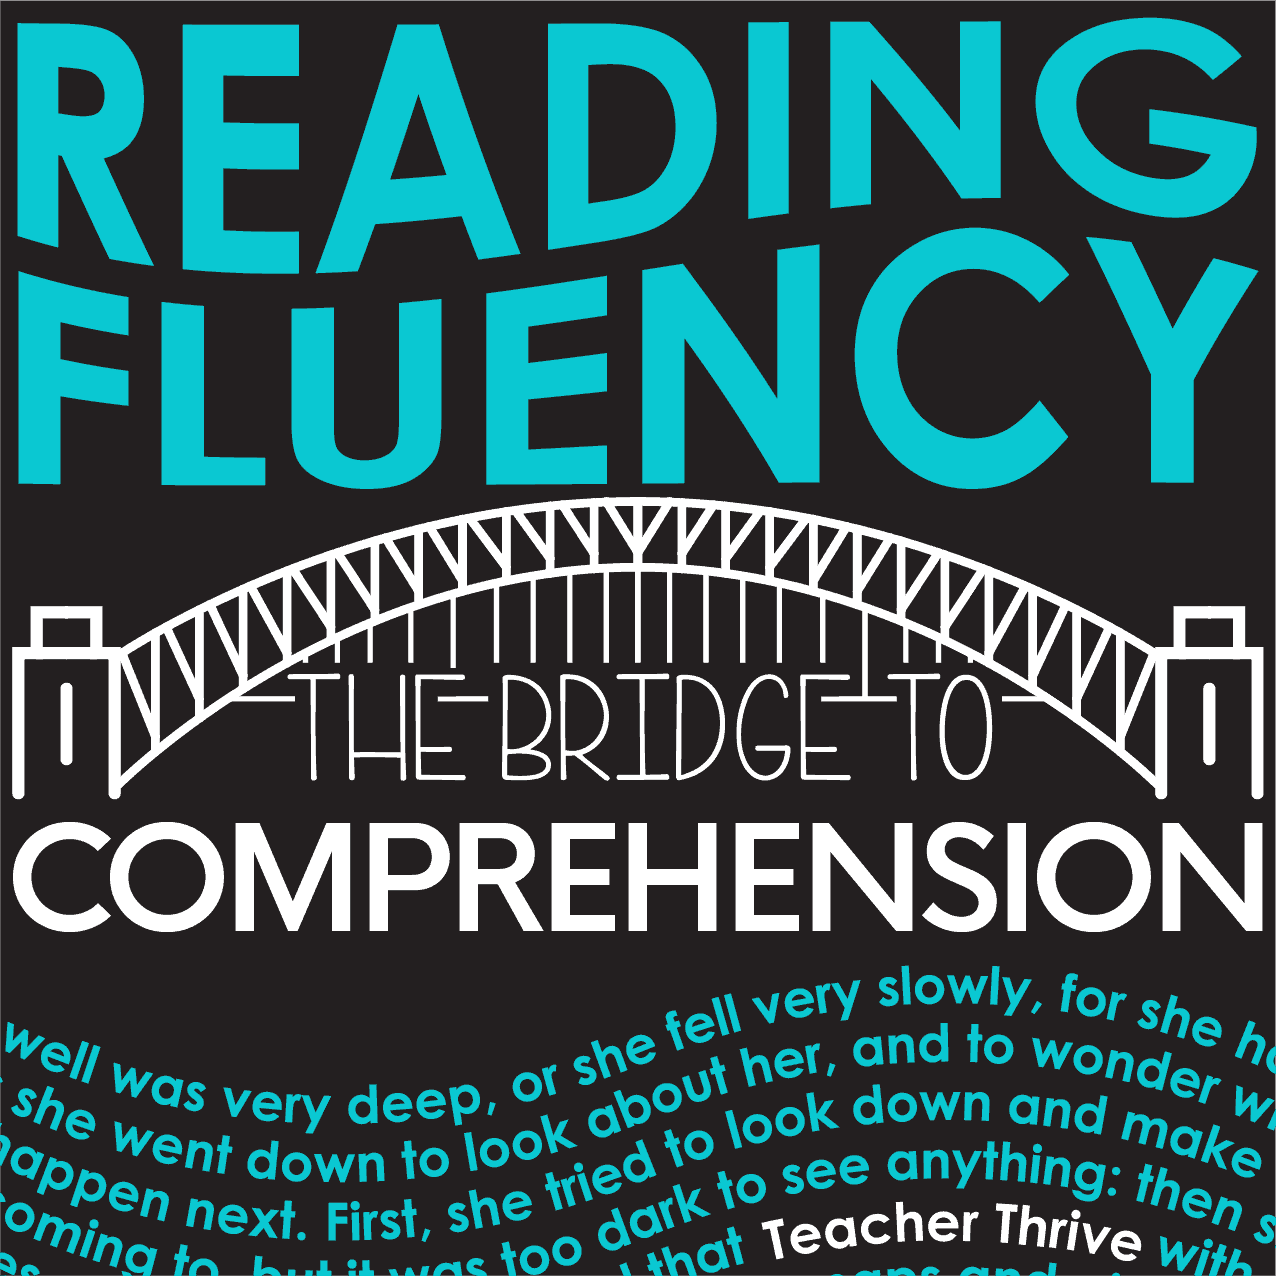 why-is-reading-fluency-so-important-teacher-thrive